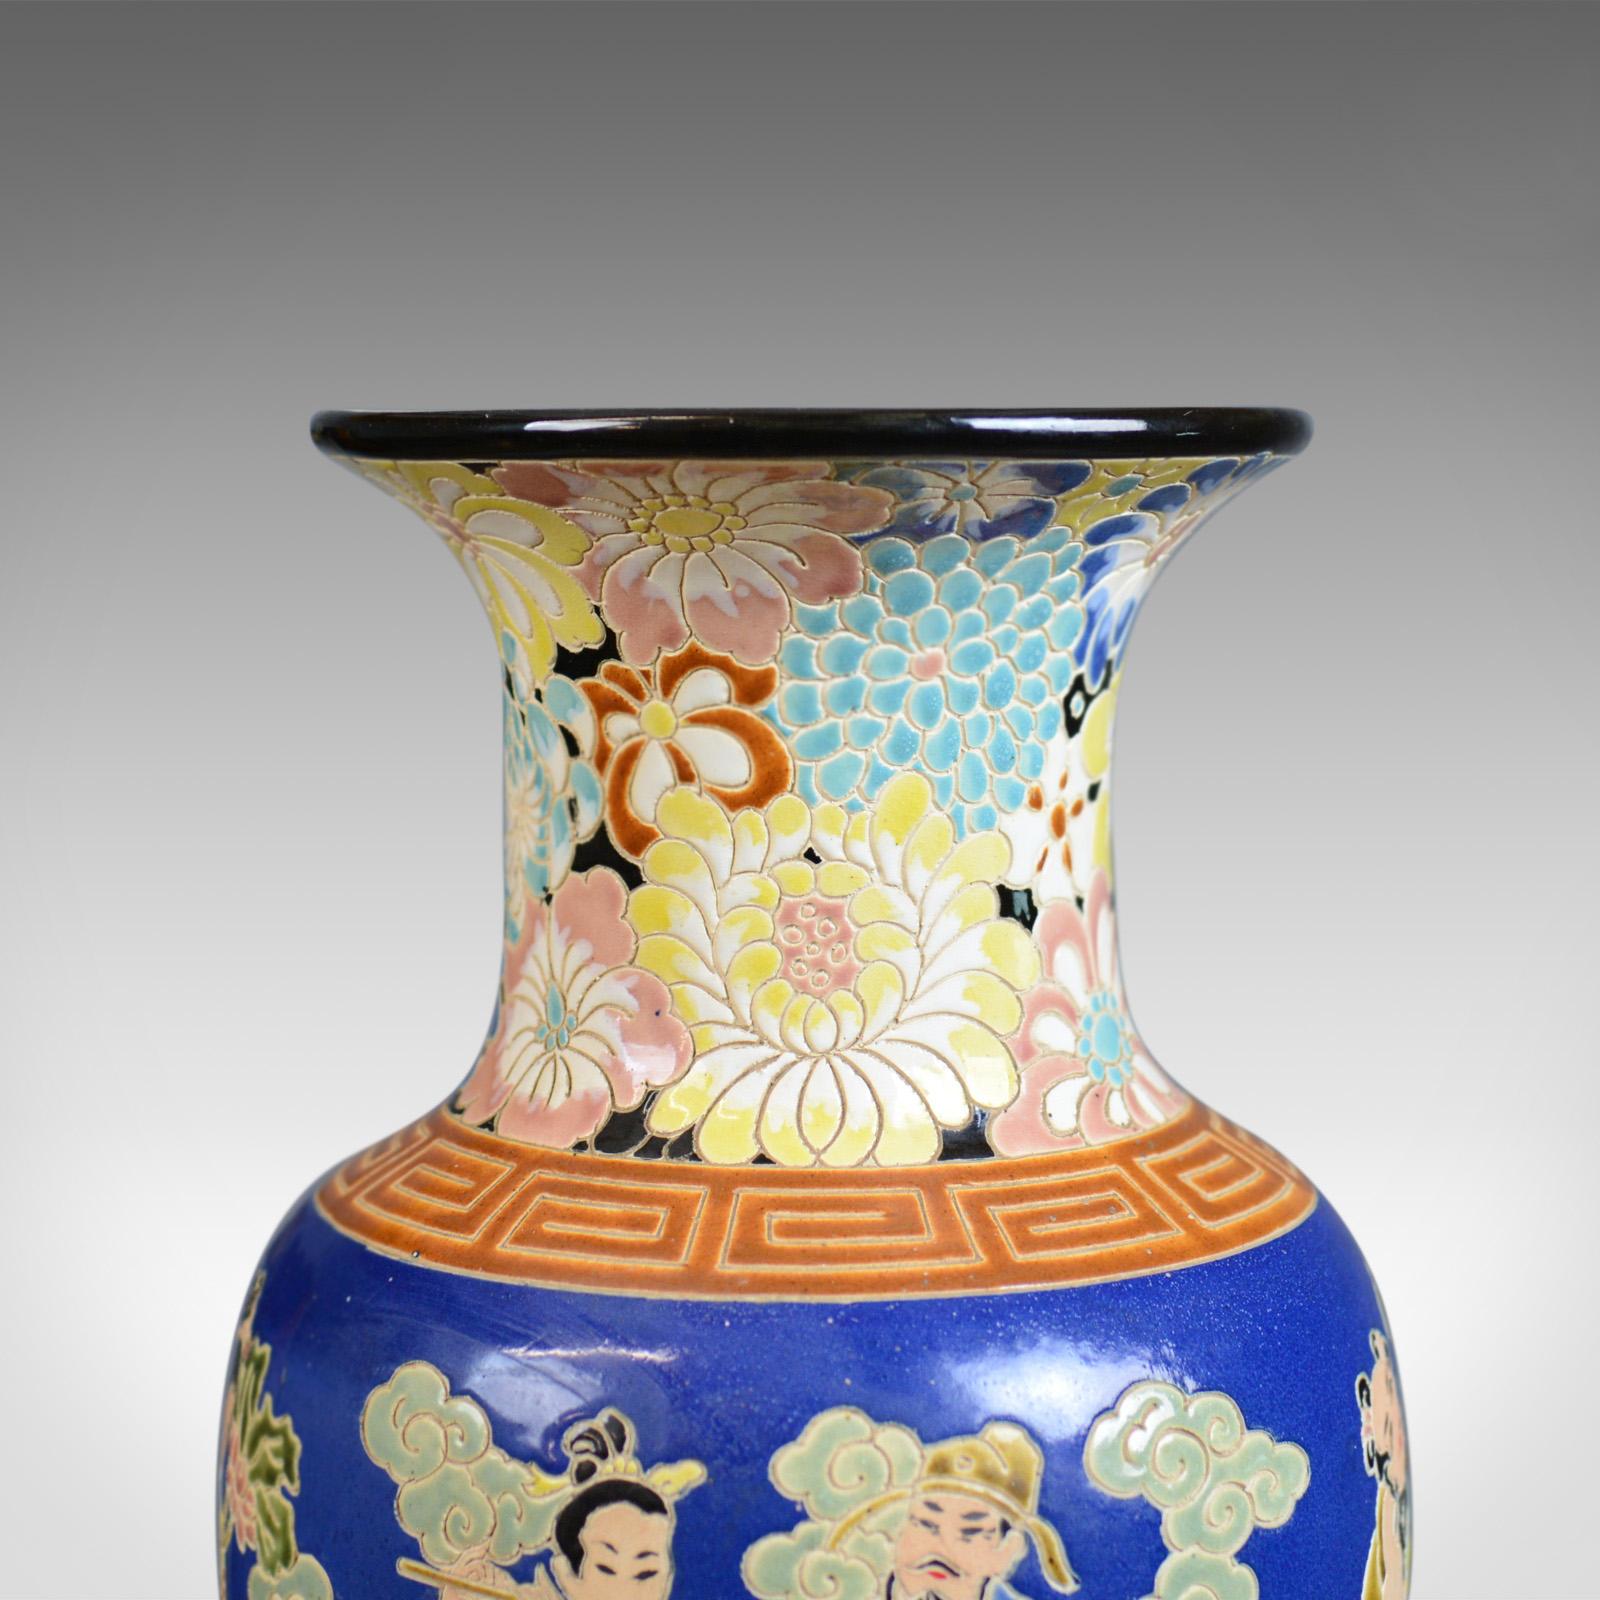 This is a large vintage Vietnamese baluster vase, a highly decorated oriental ceramic vase with a flared neck, dating to the mid-late 20th century.

Of Classic form and in good proportion
Of quality craftsmanship, free from damage
No makers mark